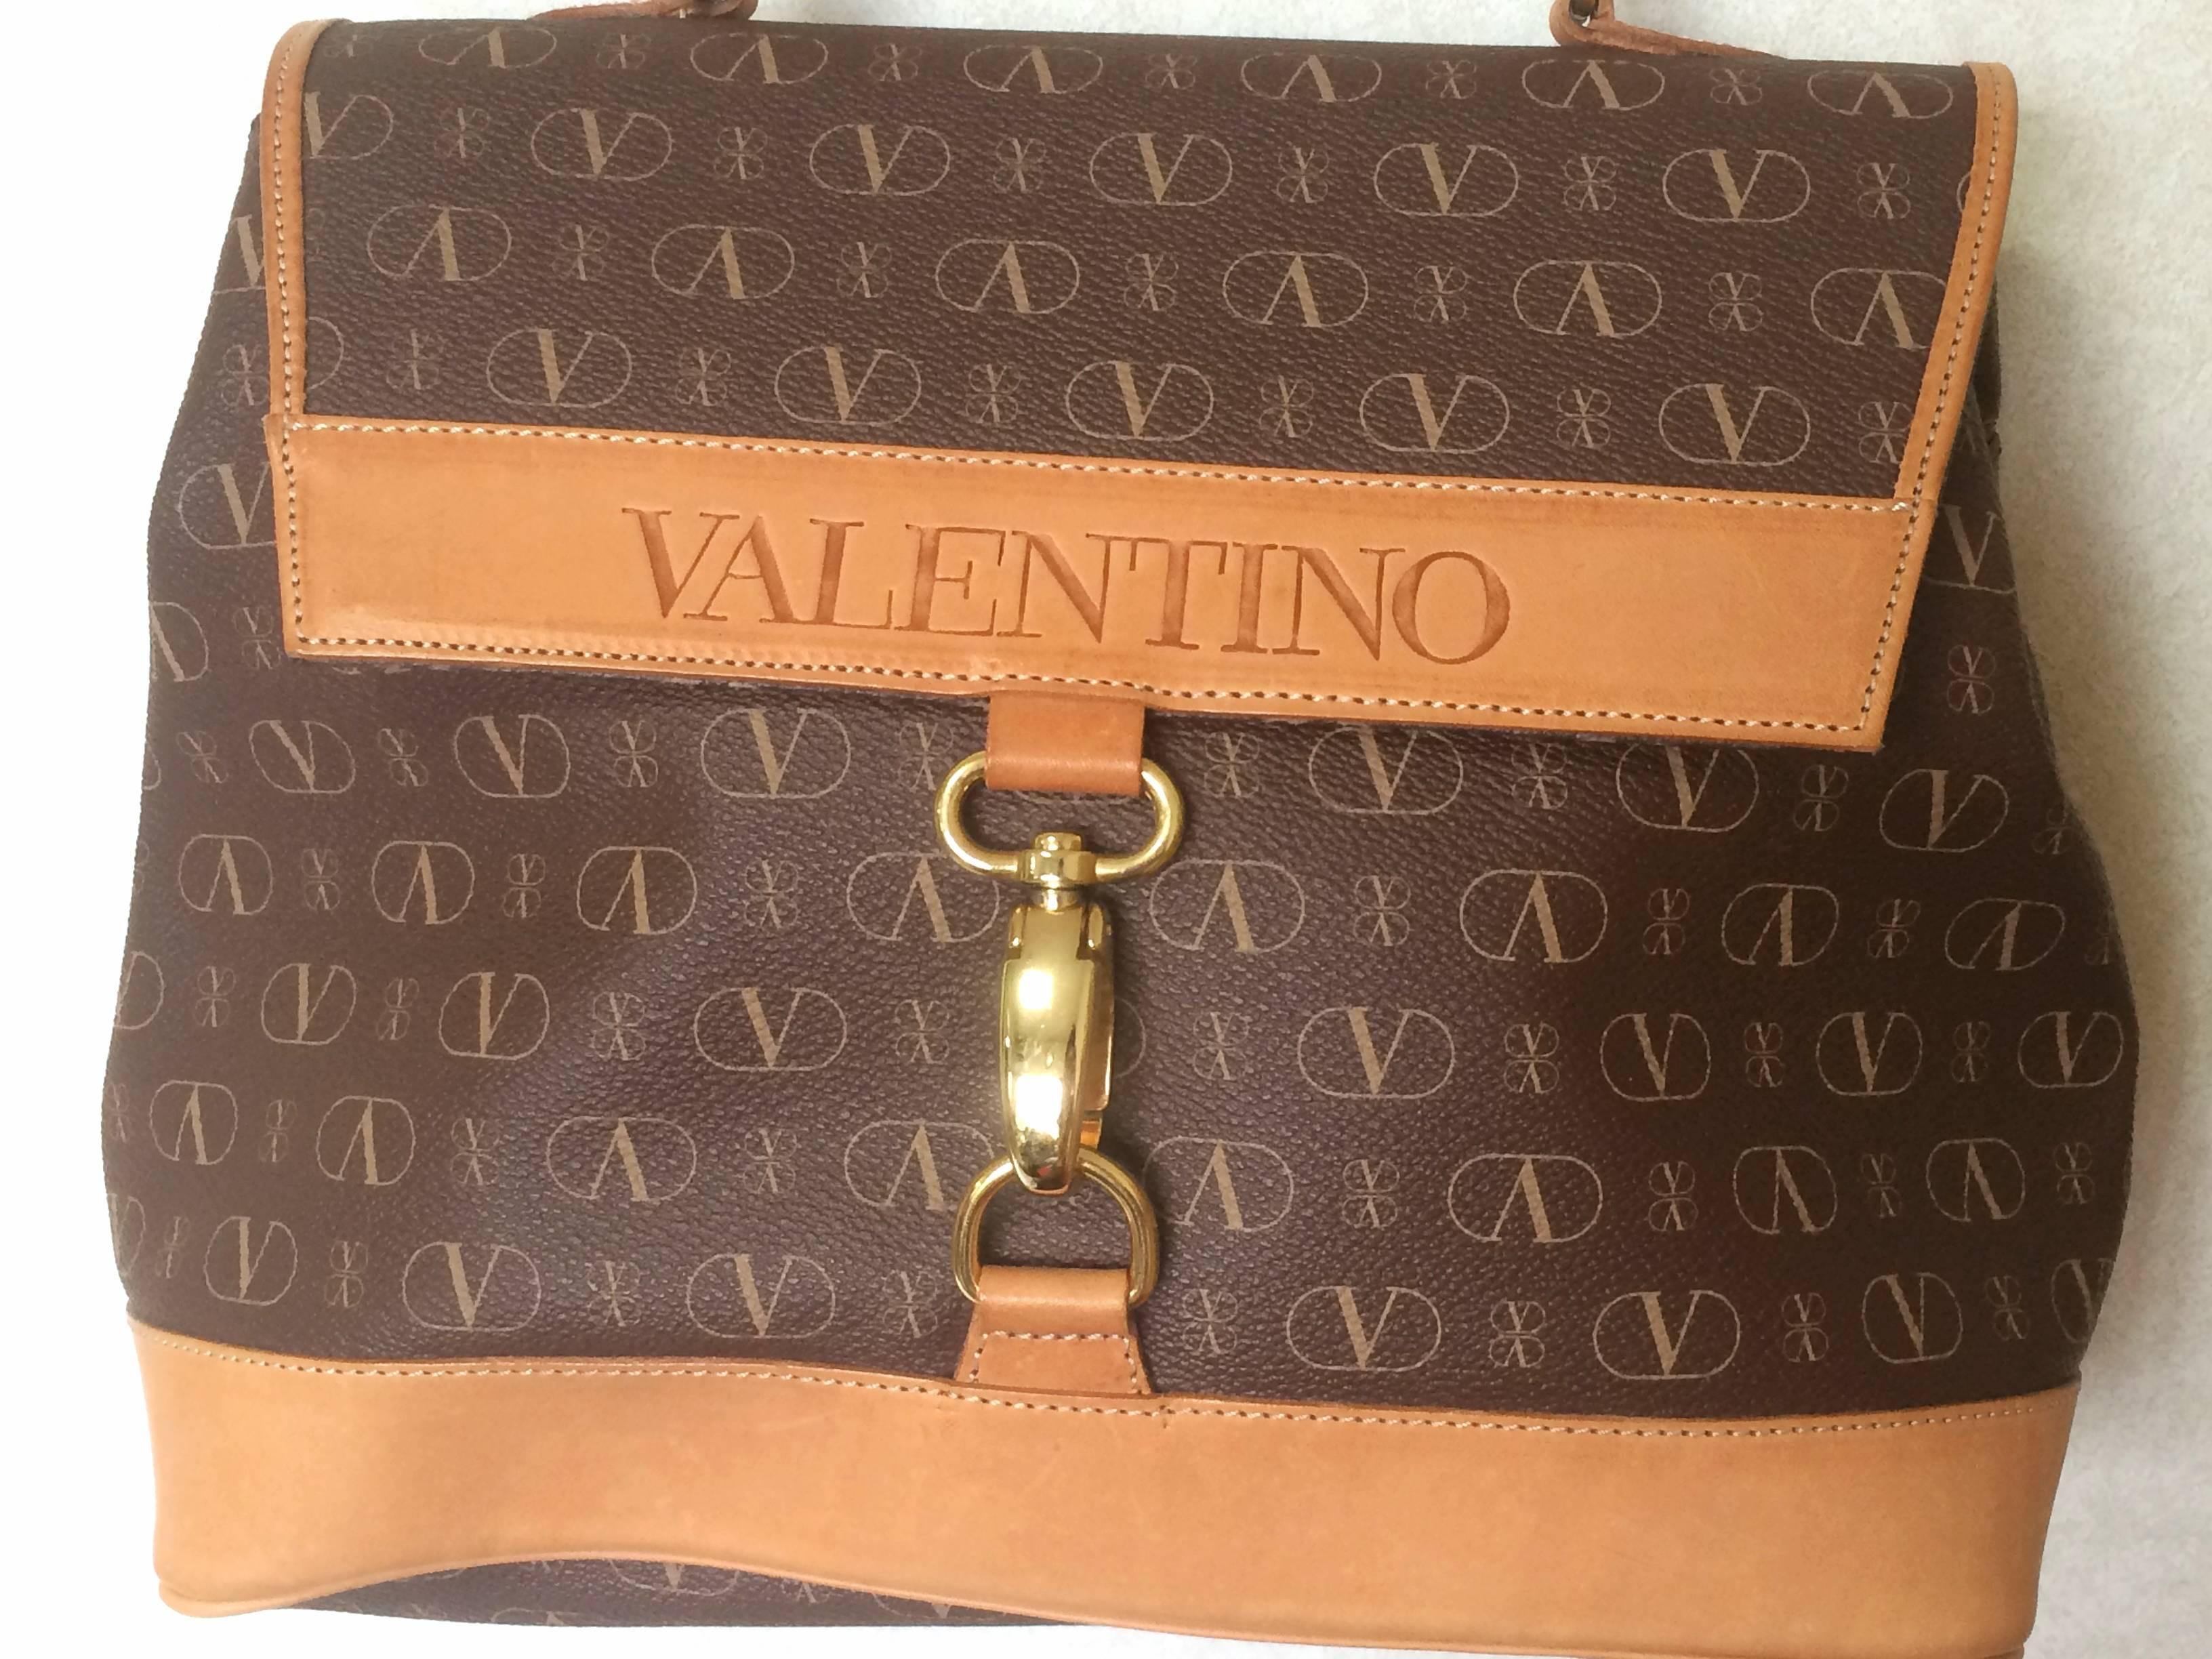 1990s. Vintage Valentino Les Sacs beige and brown shoulder handbag with leather trimming and logo print allover. Classic purse for any occasions.

Introducing another classic style handbag from VALENTINO back in the 90's.
Brown bag with beige